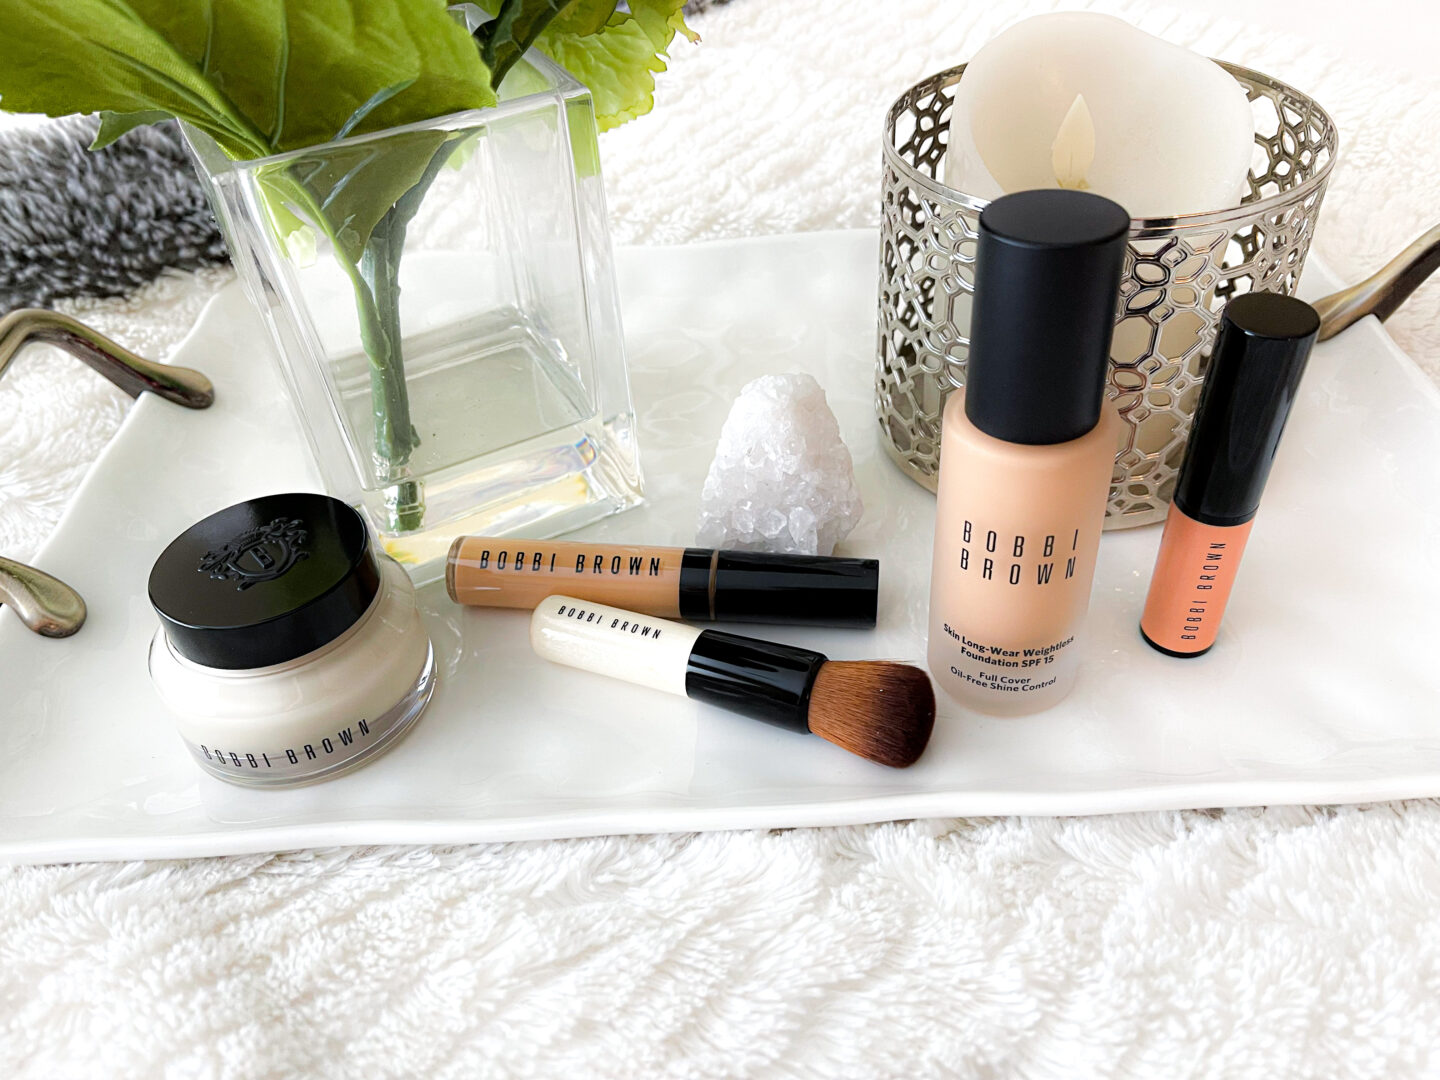 Bobbi Brown Cosmetics Complexion Routine sitting on bed tray.